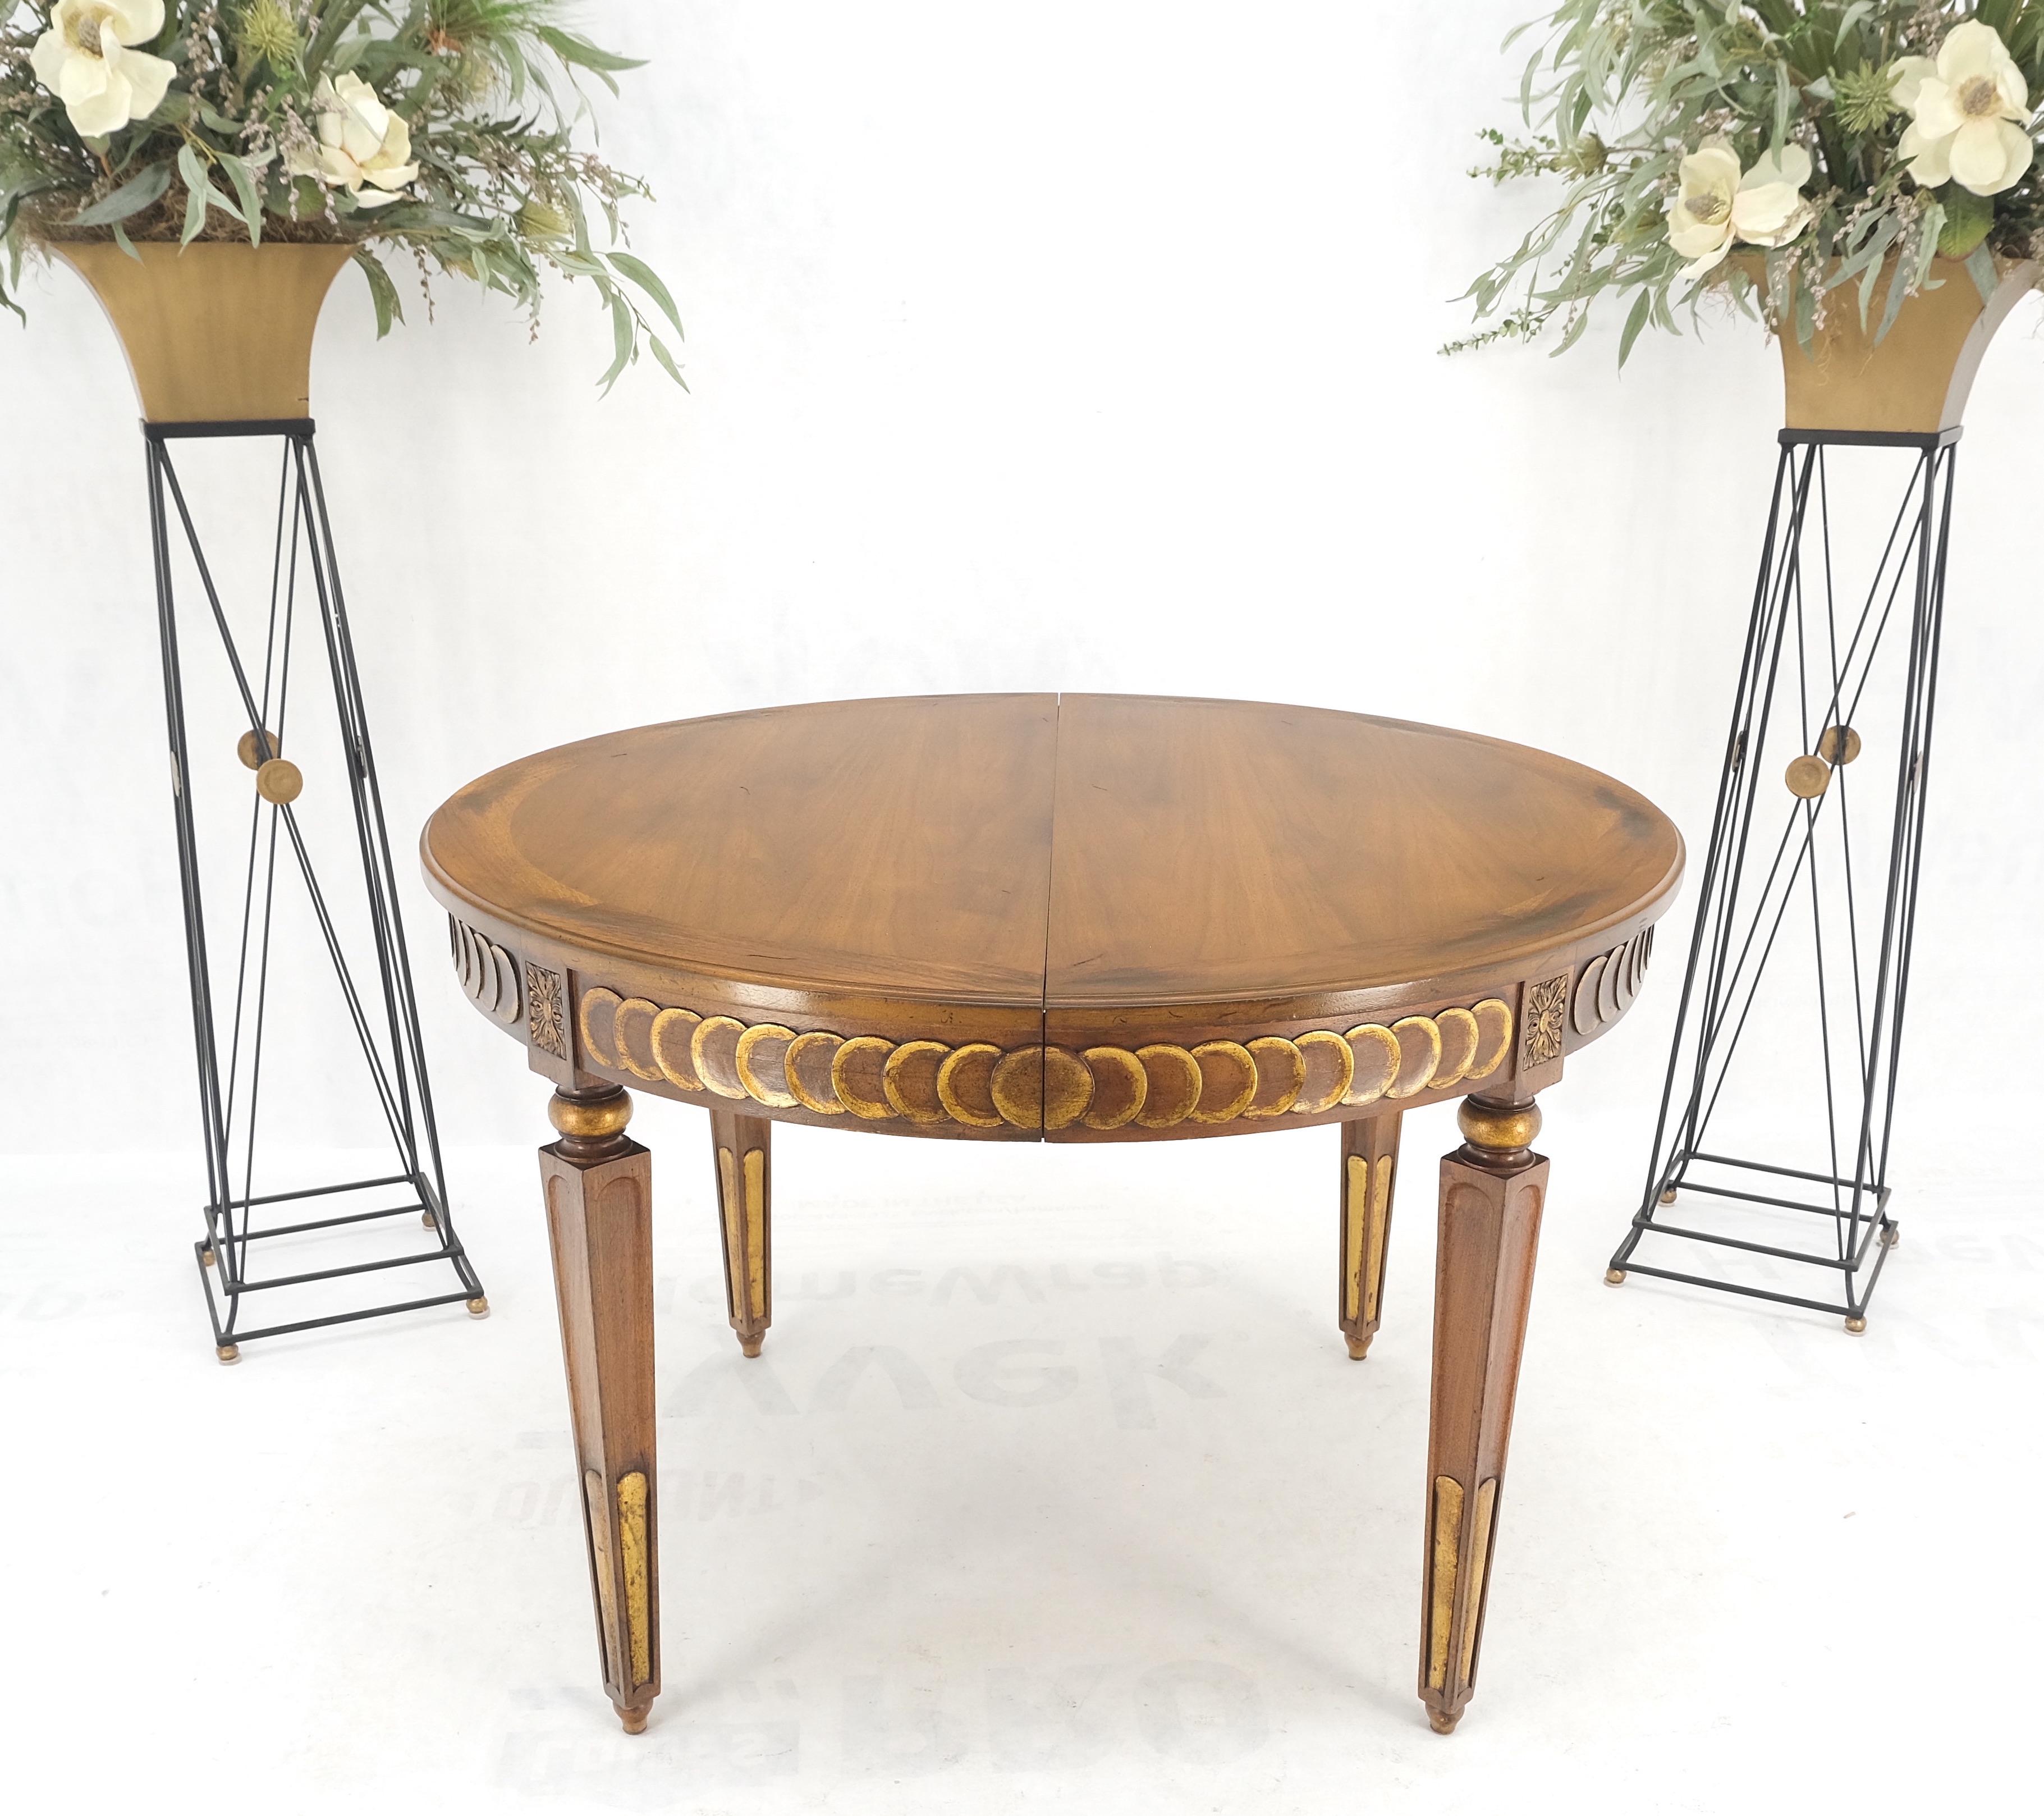 Round Mid-Century Modern Three Leaves Distressed Walnut Dining Table MINT!
Gold leaf overlapping decorated circular design skirt. 

Three leaves, each measuring 18 inches across
total table length equals 98 inches wide.